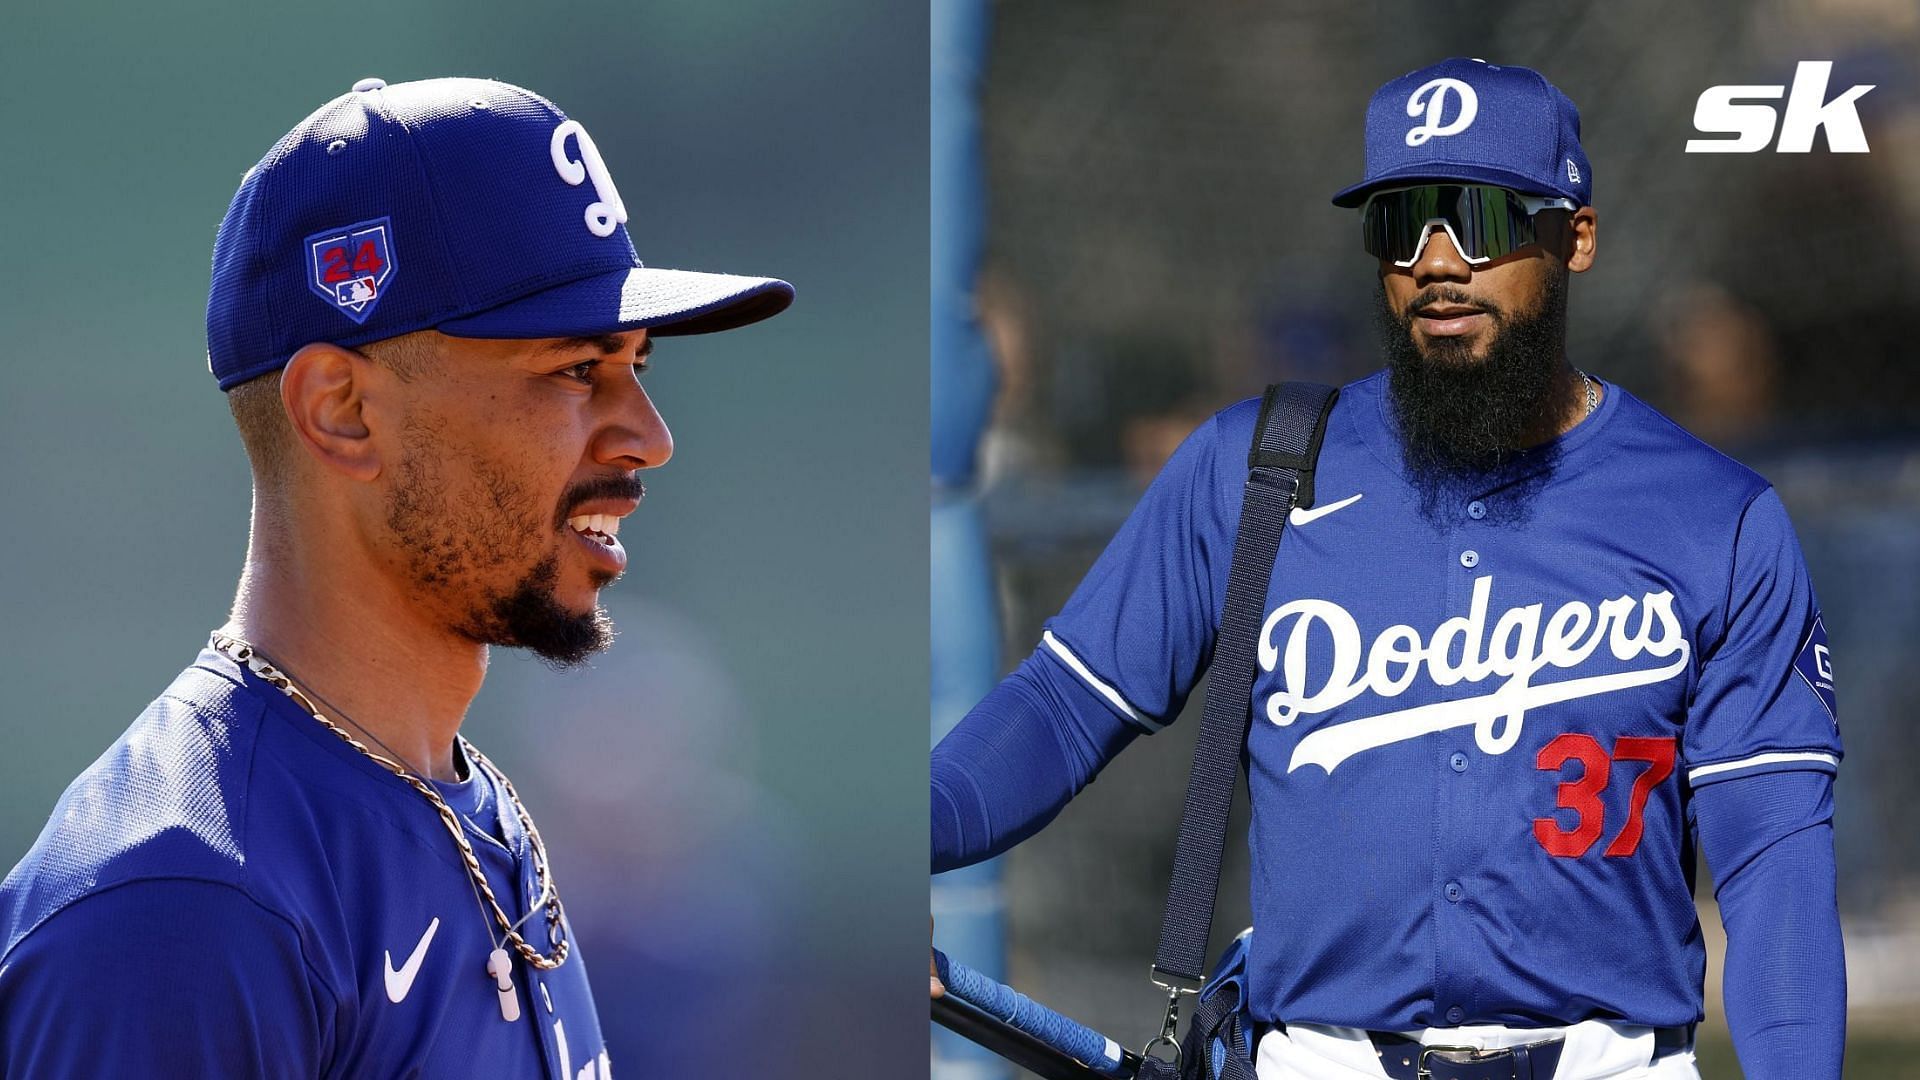 MLB fans are shocked as Los Angeles Dodgers score eight runs in first inning of Spring Training against San Diego Padres